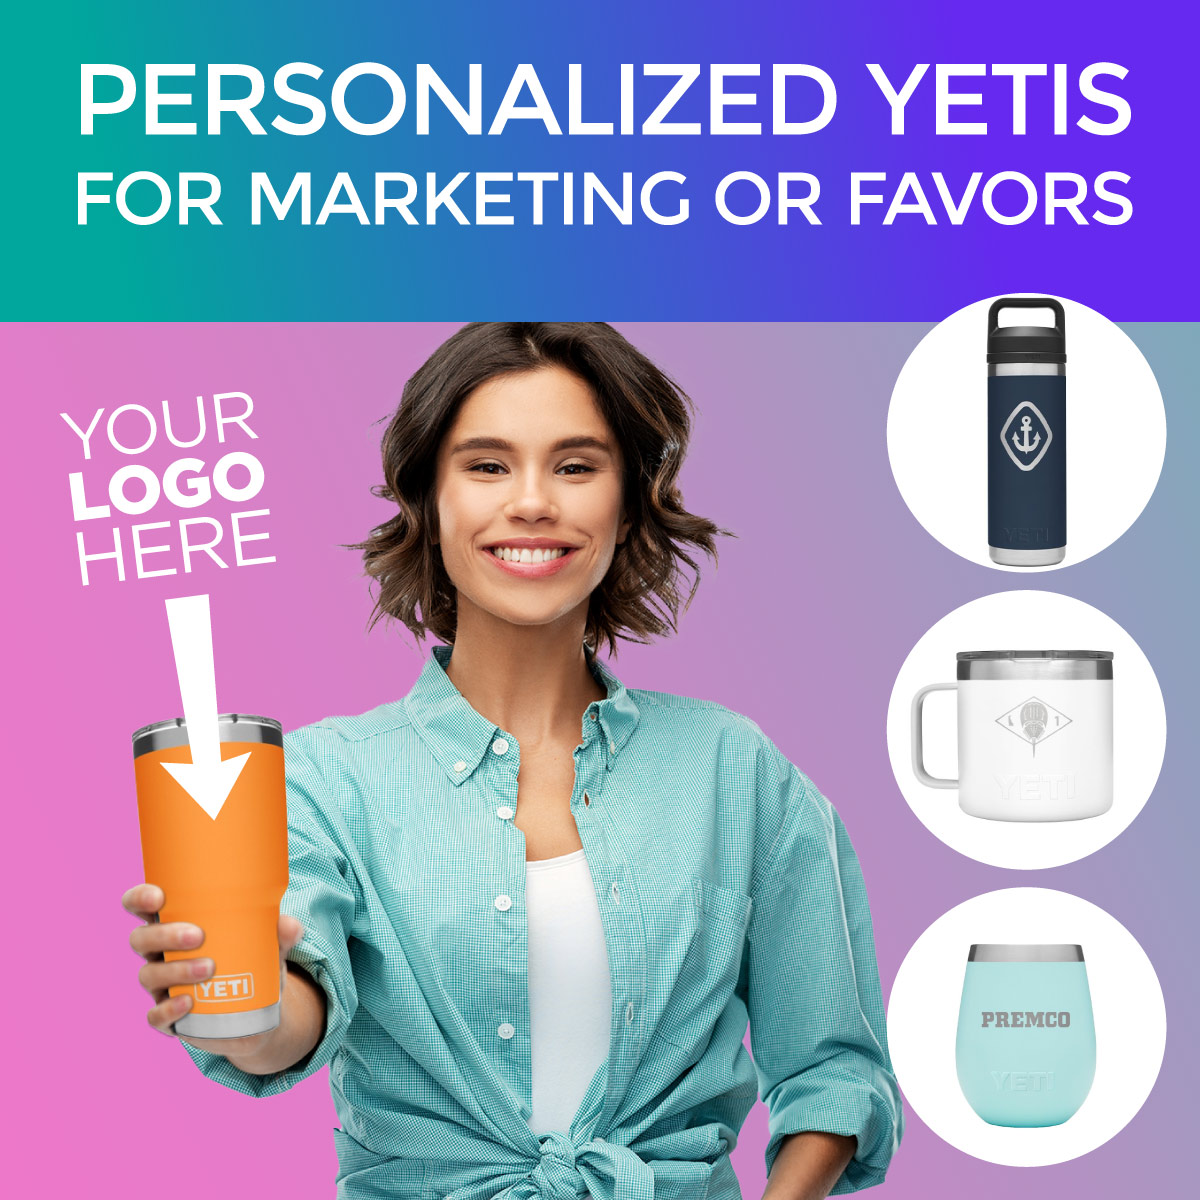 Brand It Promotional Products - Personalized Items & Swag: YETI